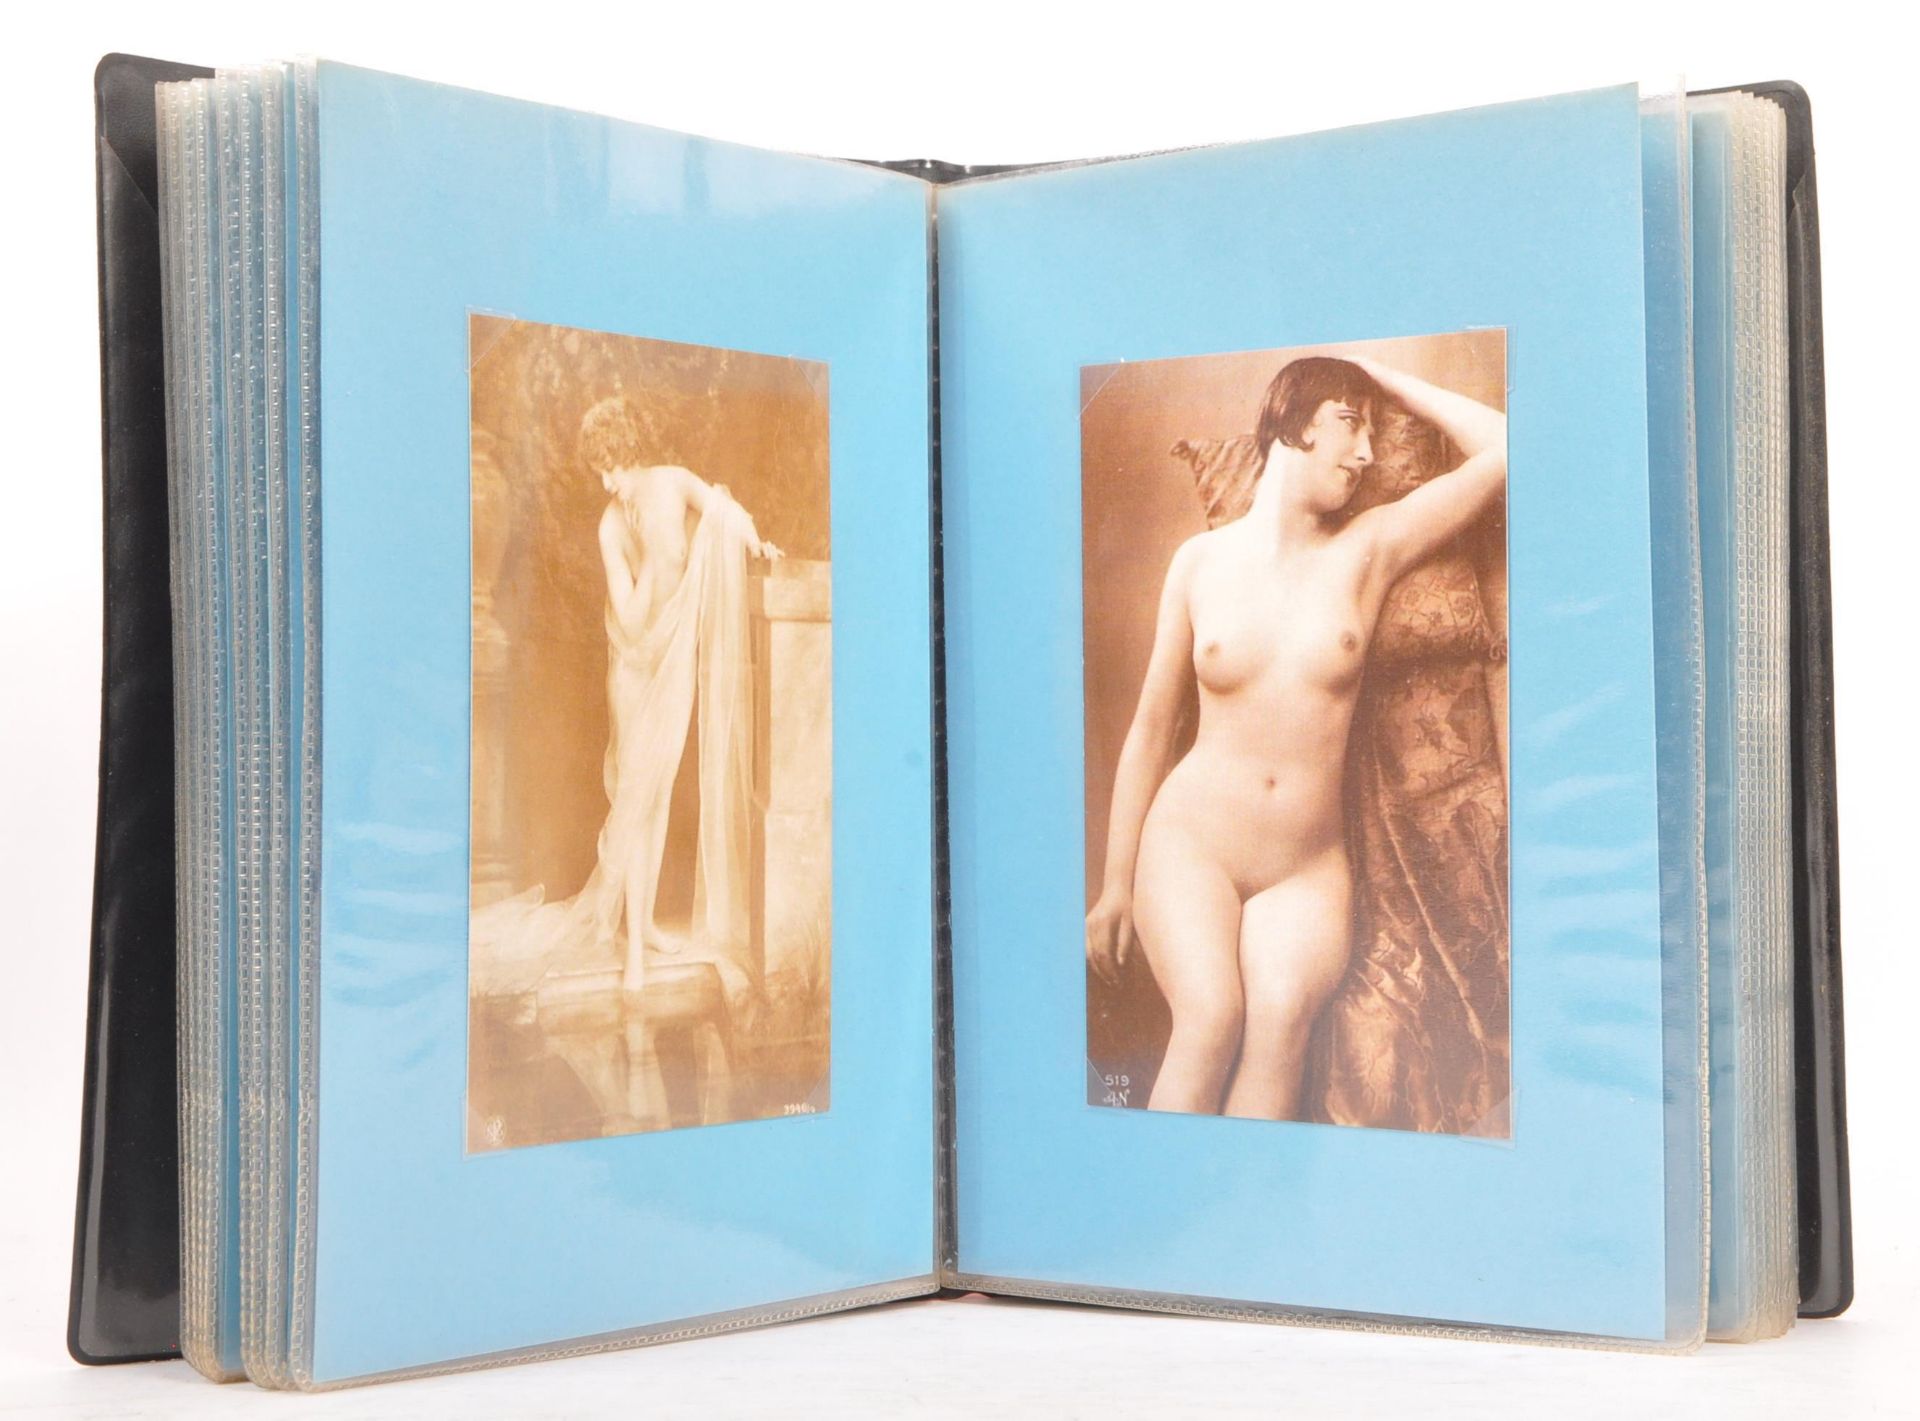 ALBUM OF FORTY FRENCH EROTIC REPRODUCTION SEPIA POSTCARDS